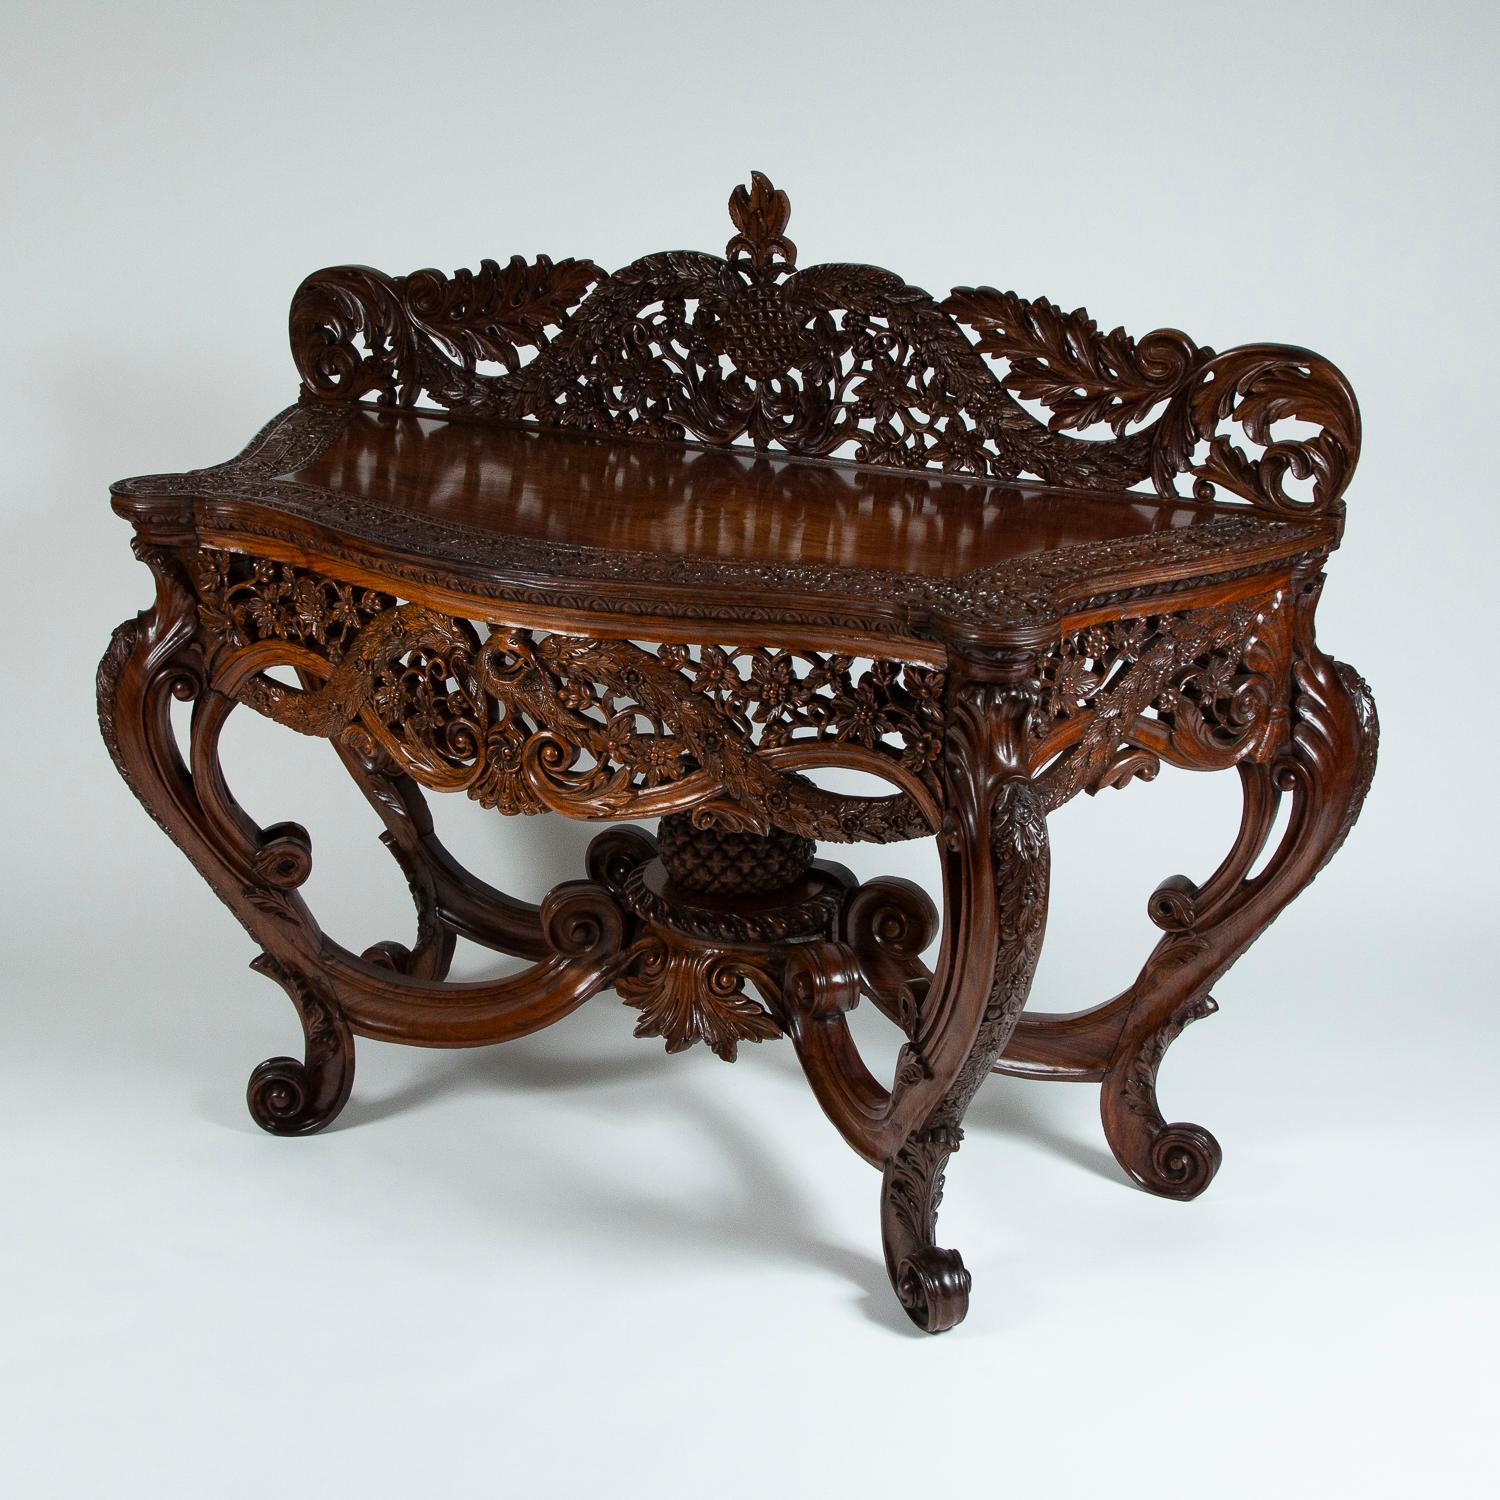 A late 19th century highly carved teak console table. 

Very ornate carving of pineapples, vines, phoenix, and jungle village scenes.